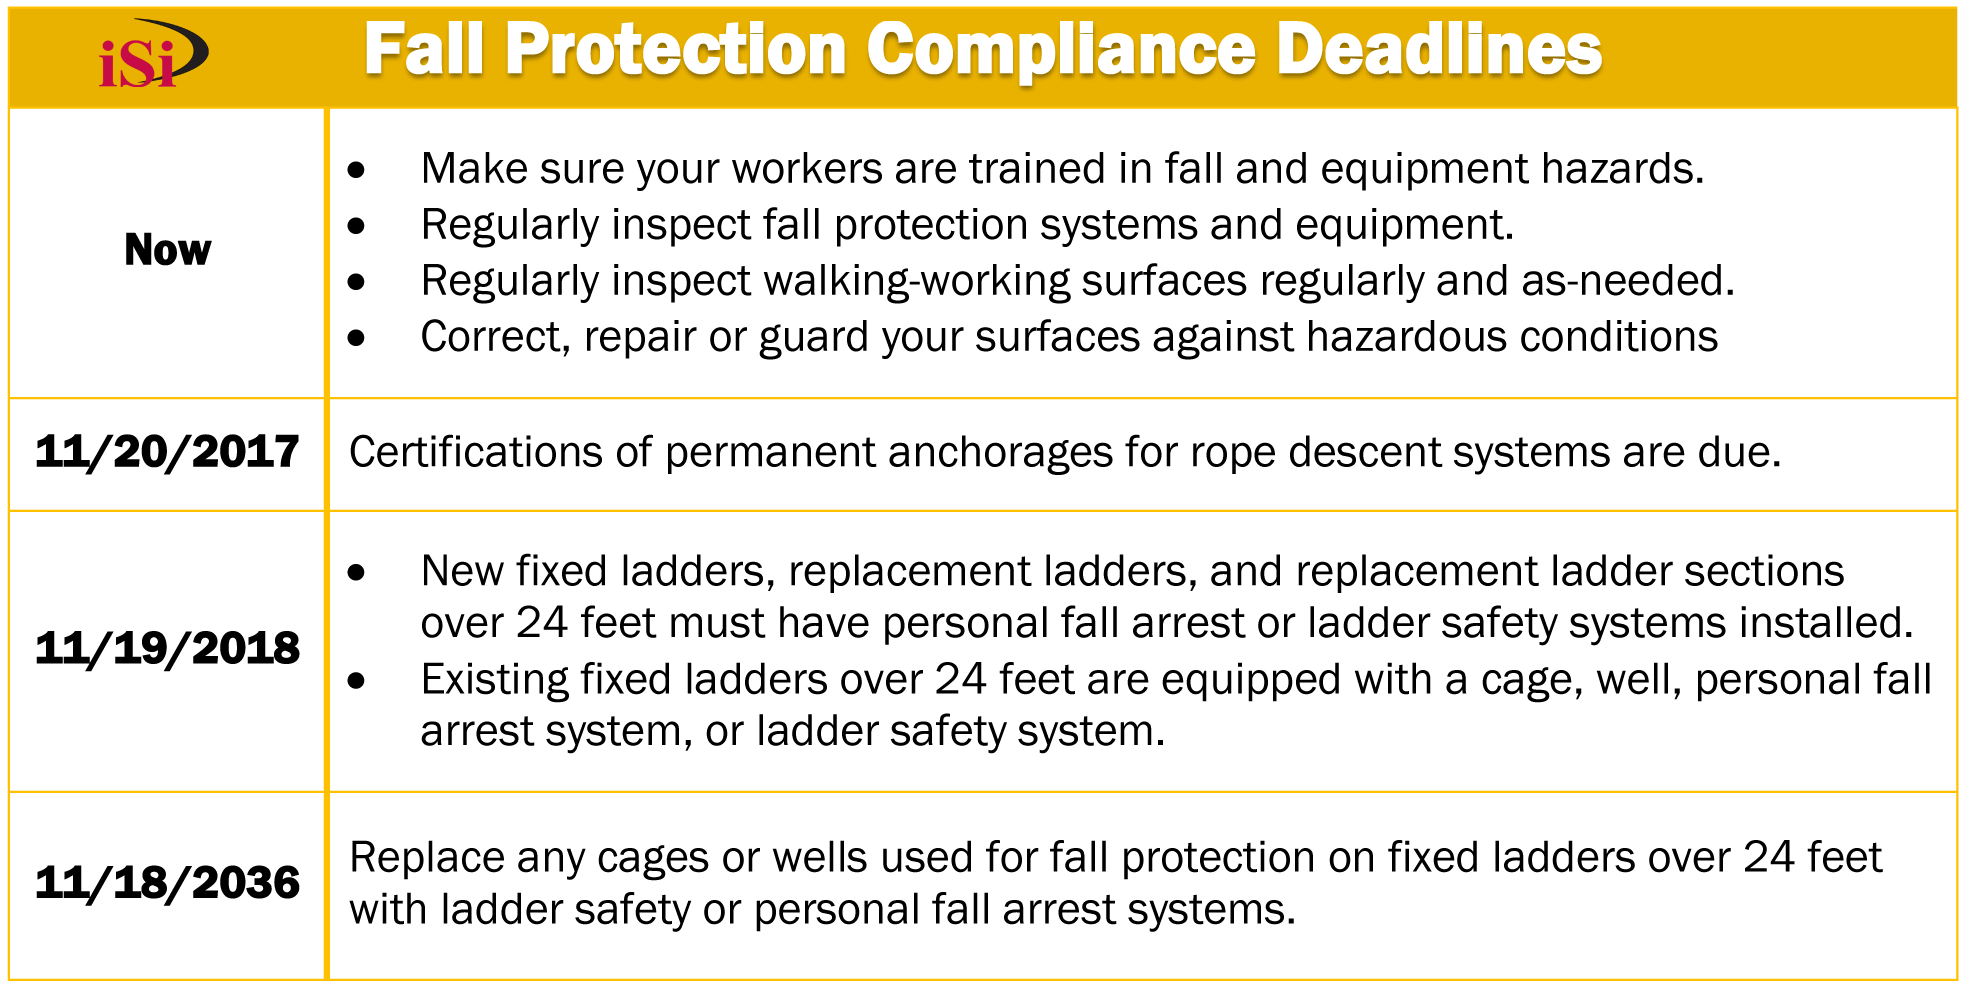 A table of fall protection compliance deadlines for the new general industry walking-working surfaces standard.